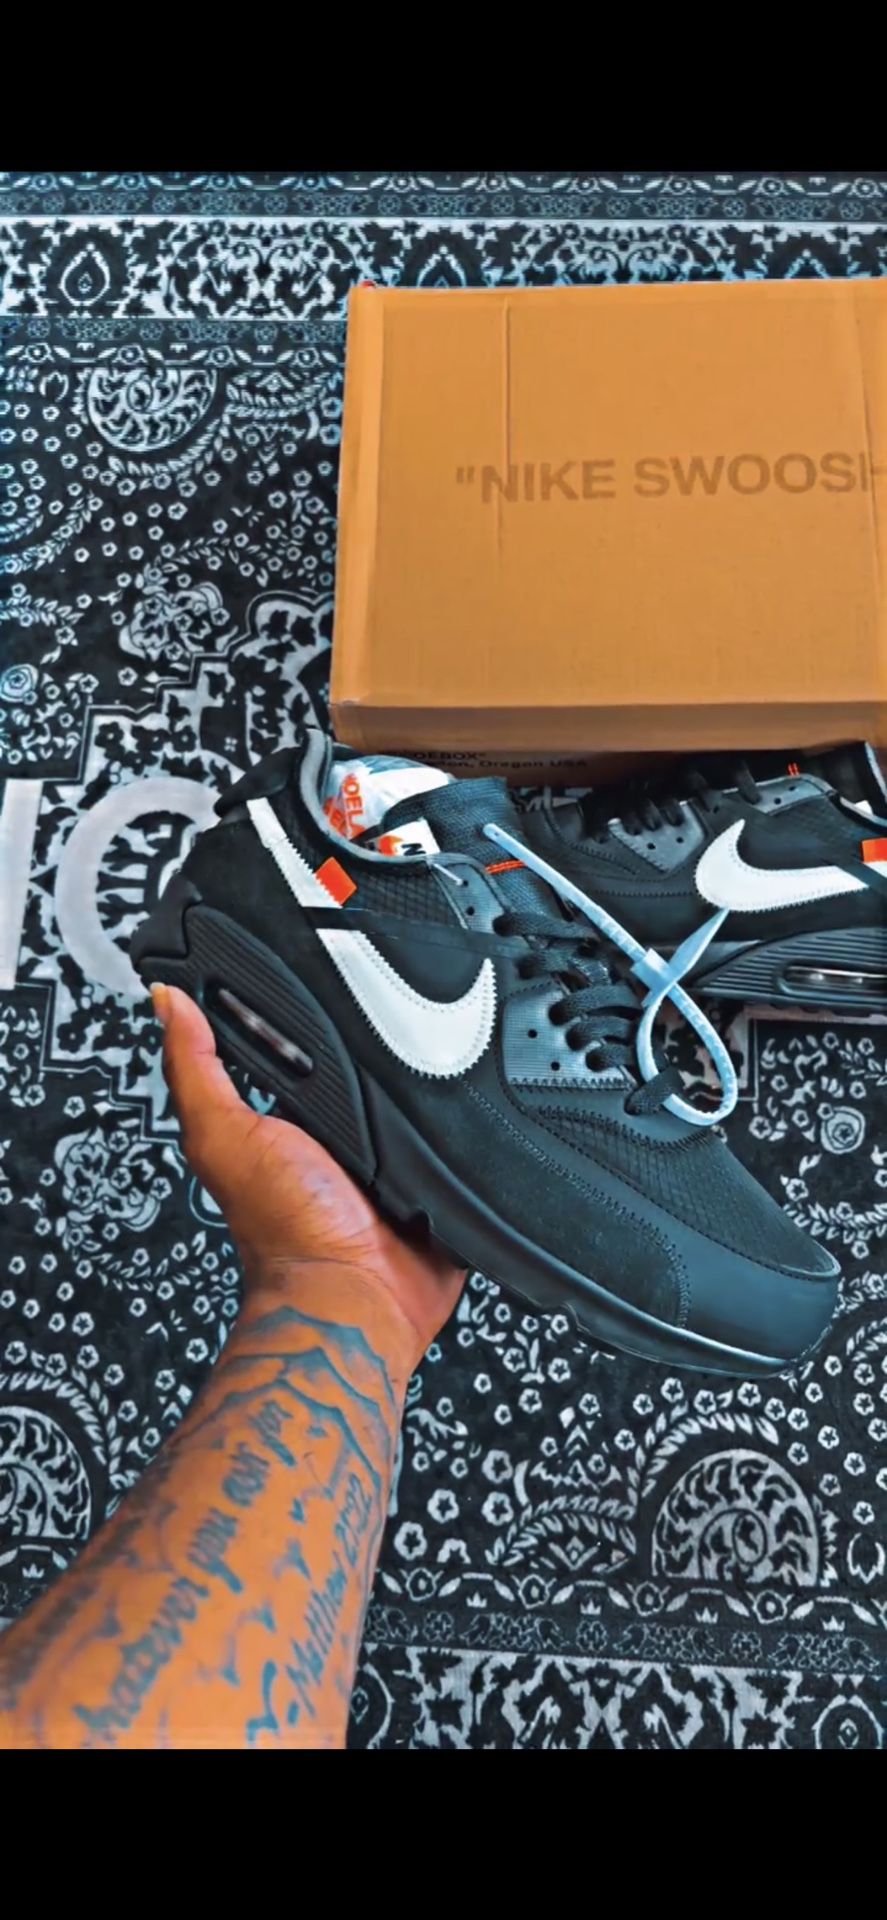 Nike x Off White Airmax 90 “Black/White” SIZE 10.5M FOR SELL NOW! 🚨🚨 Feel free to DM or comment for any additional information 📲🏁 Shop select Desi